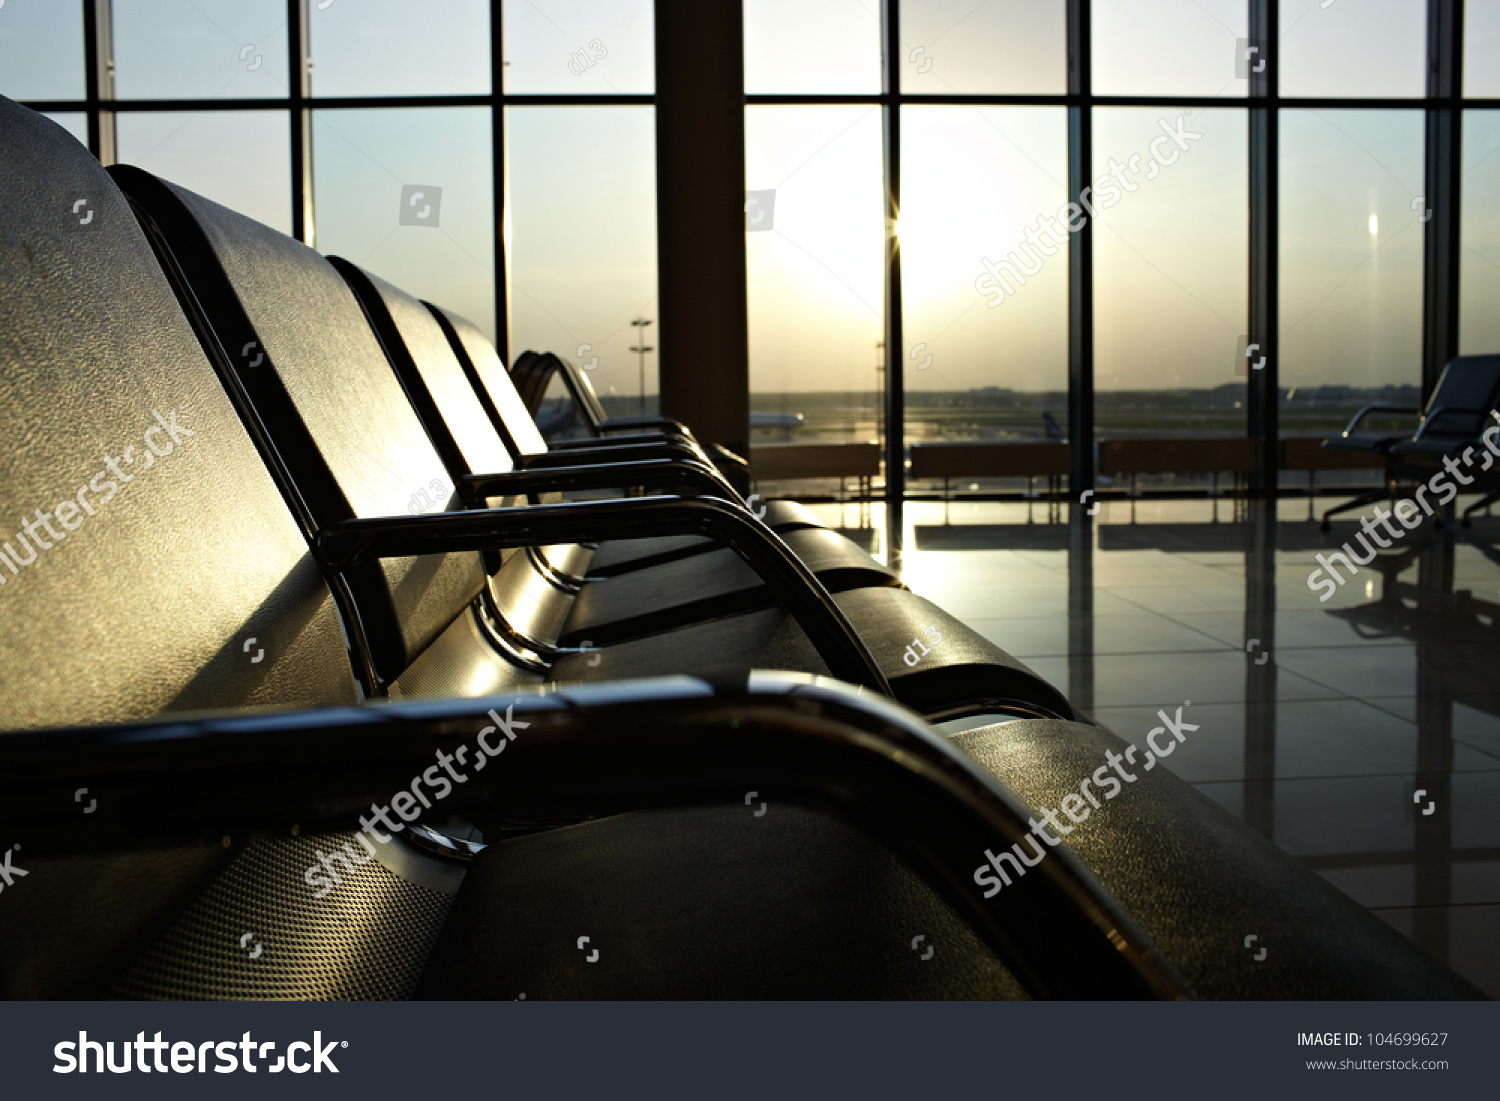 Waiting area at airport #104699627